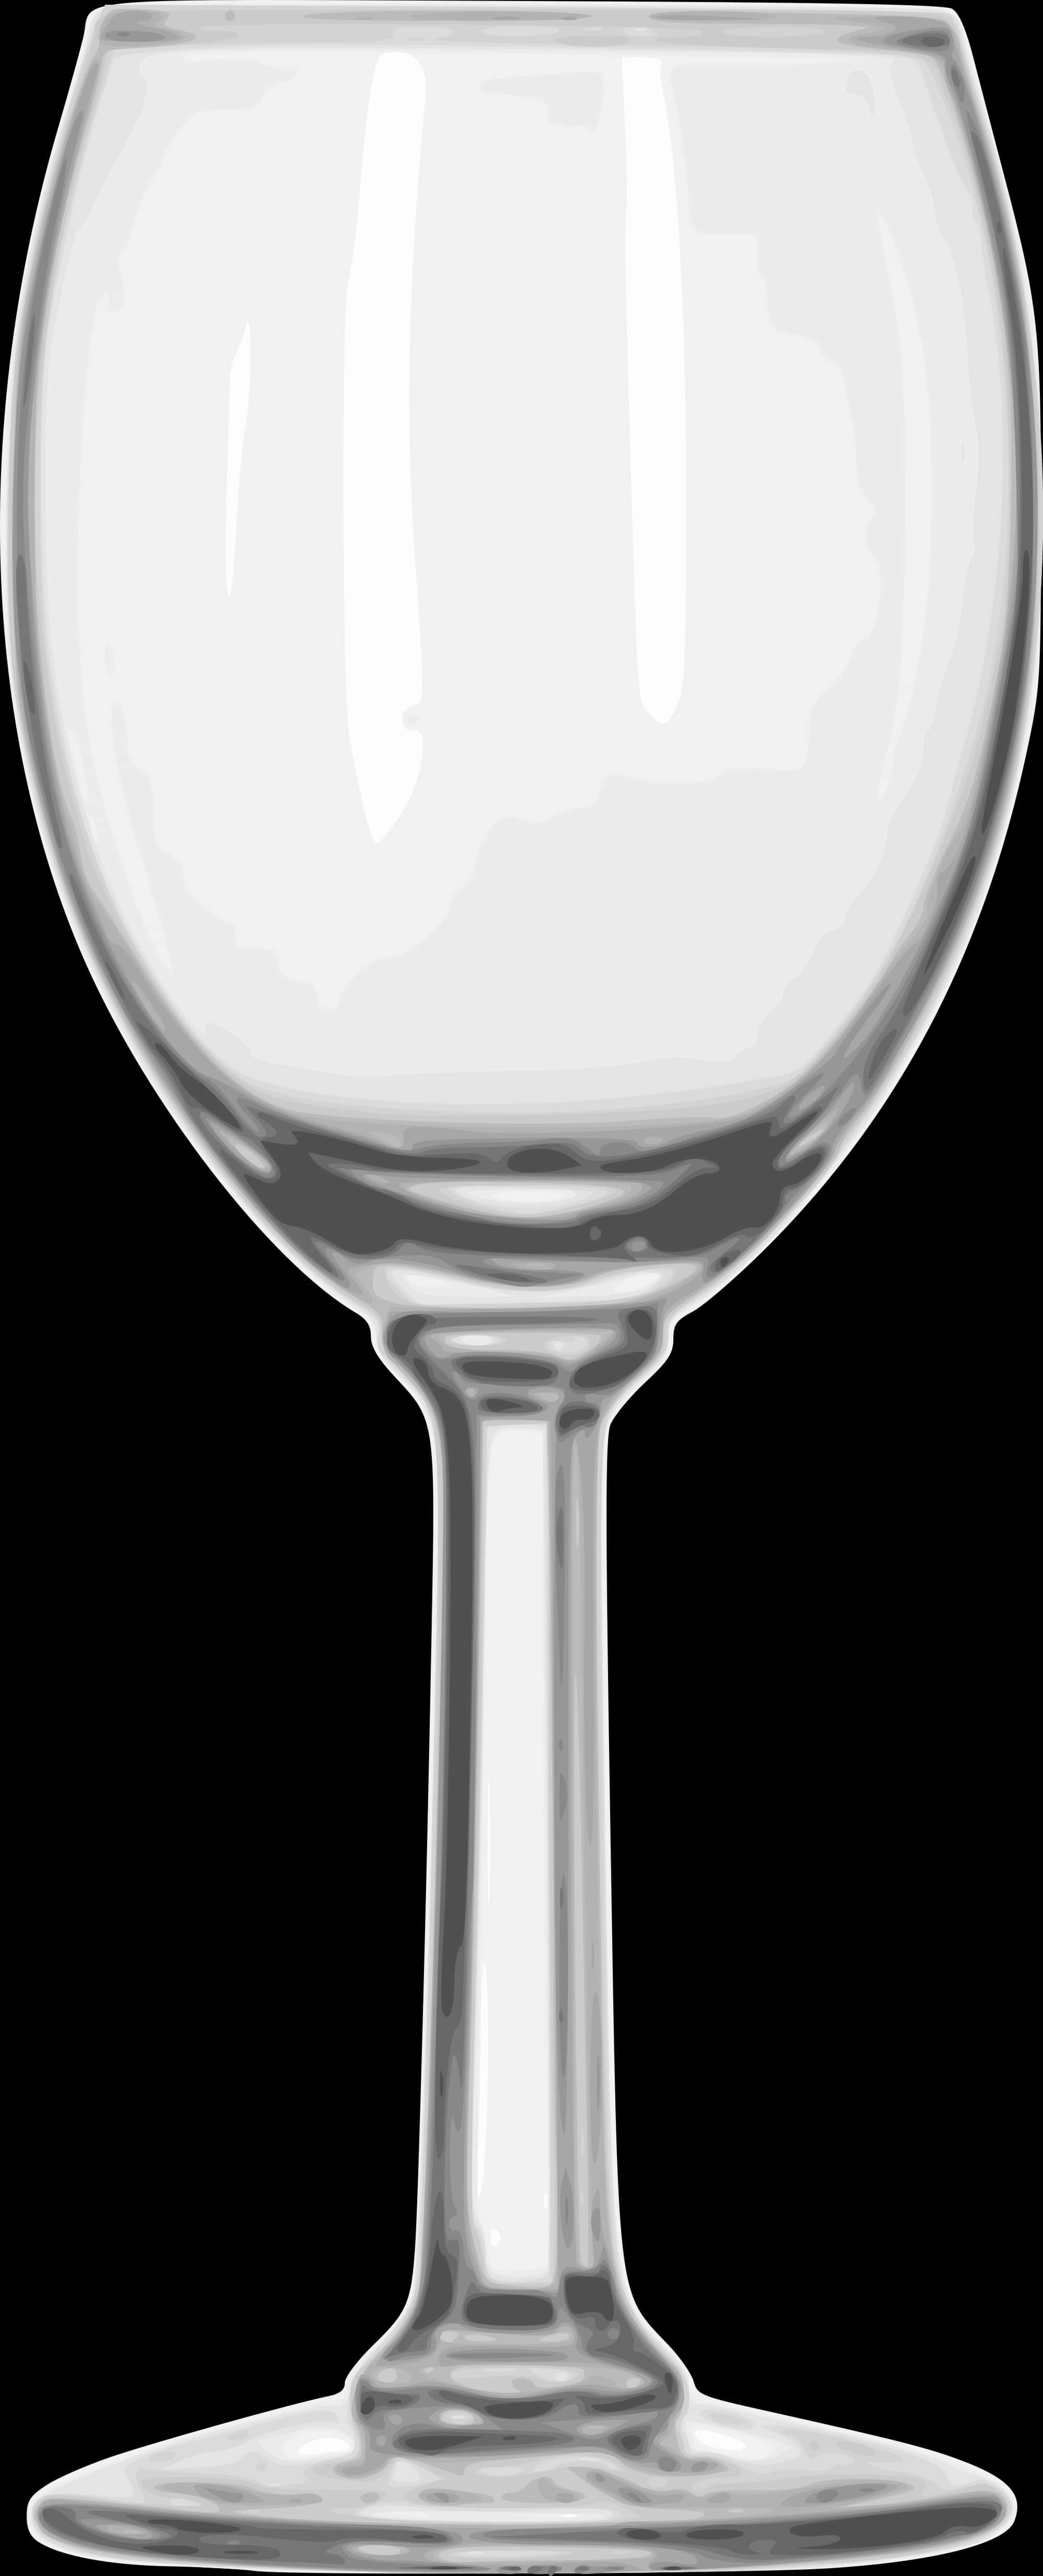 A Clear Wine Glass With A Stem